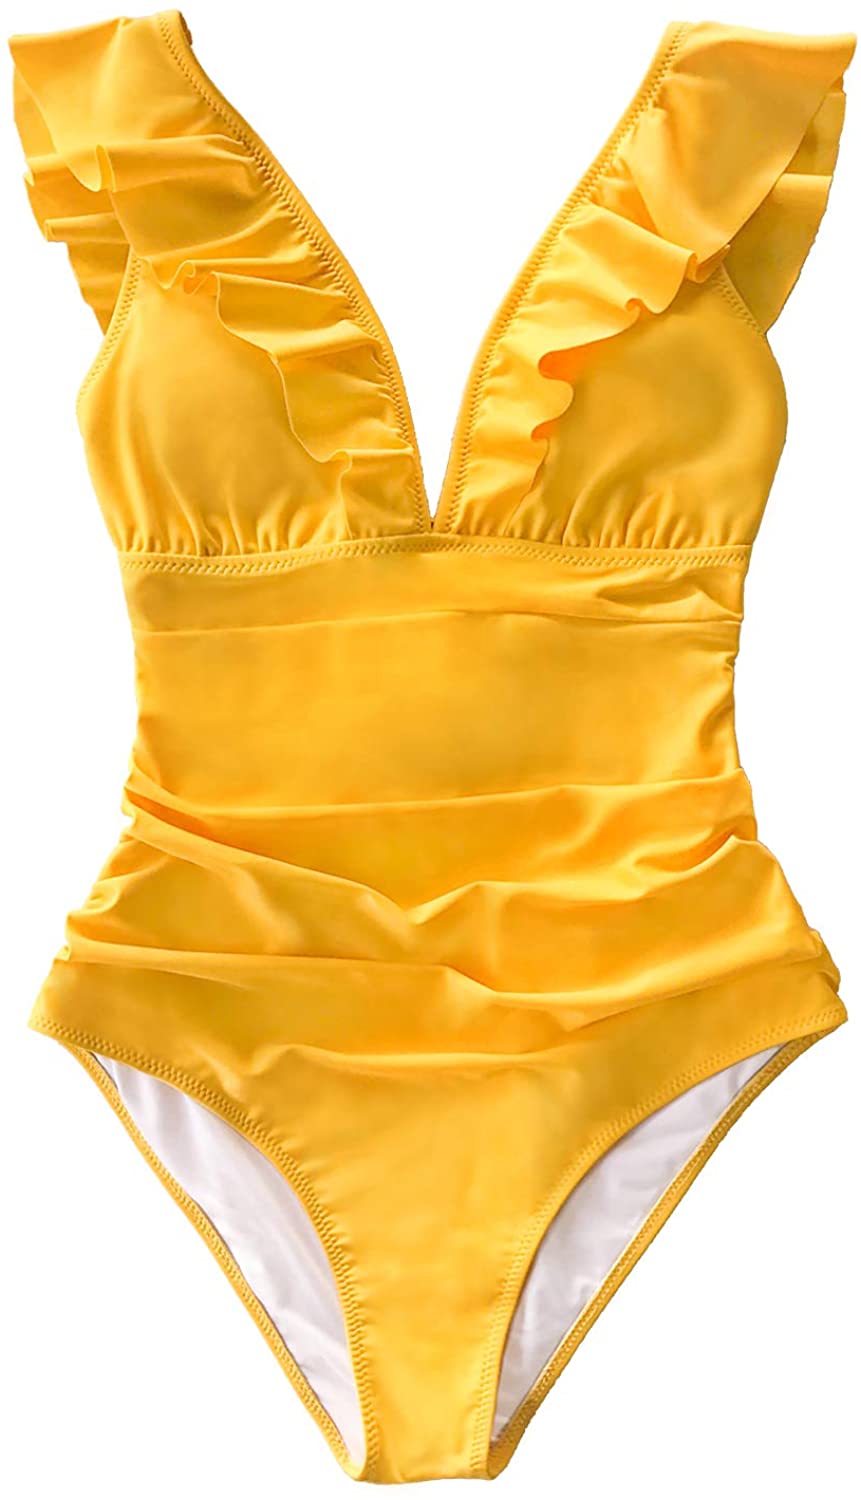 CUPSHE Women's V Neck One Piece Swimsuit Ruffled Lace Up, Yellow, Size ...